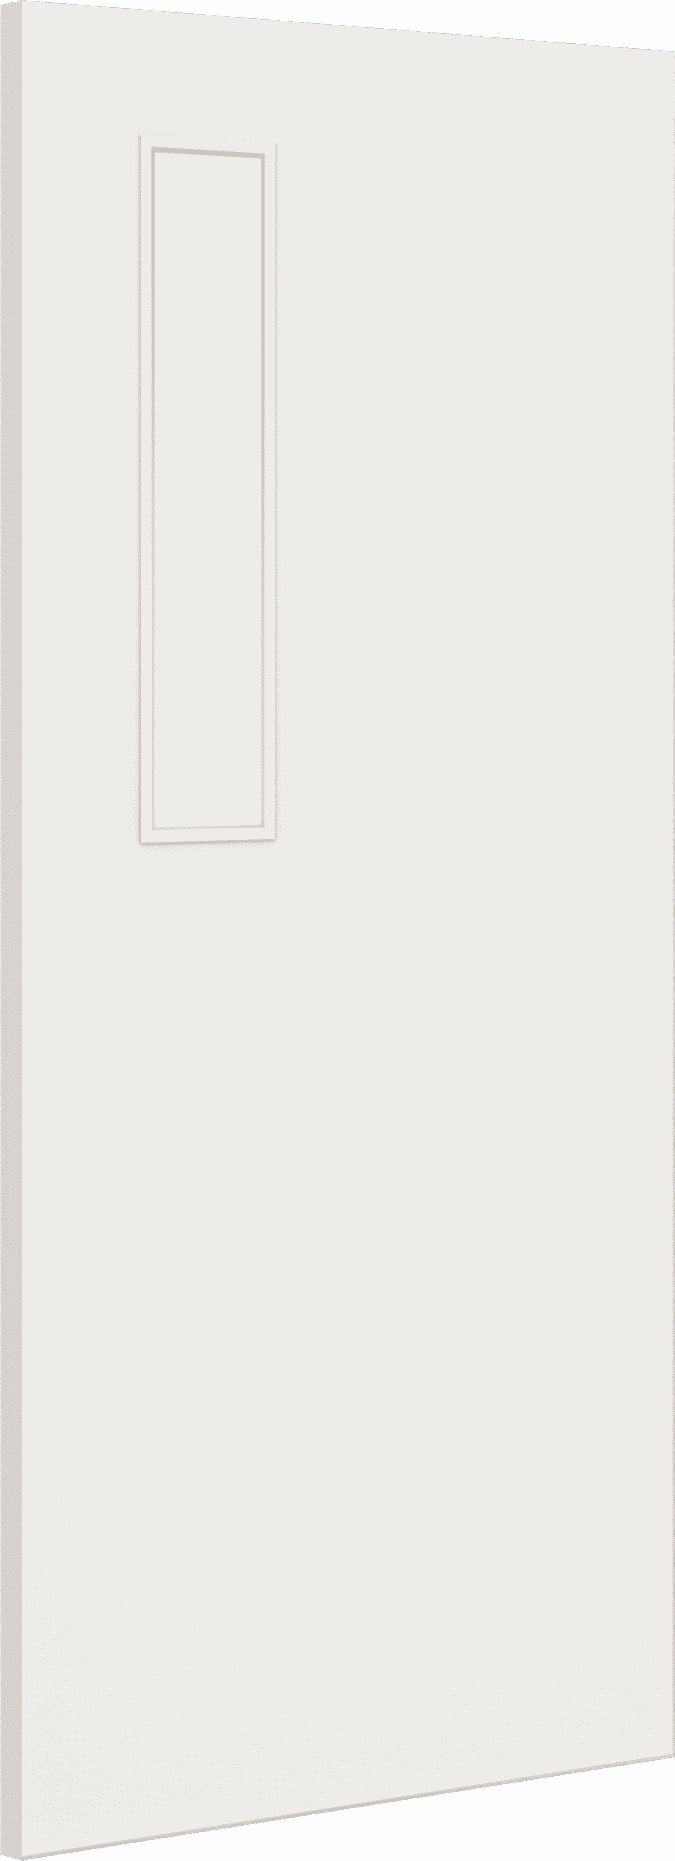 1981mm x 533mm x 44mm (21") Architectural Paint Grade White 08 Frosted Glazed Fire Door Blank